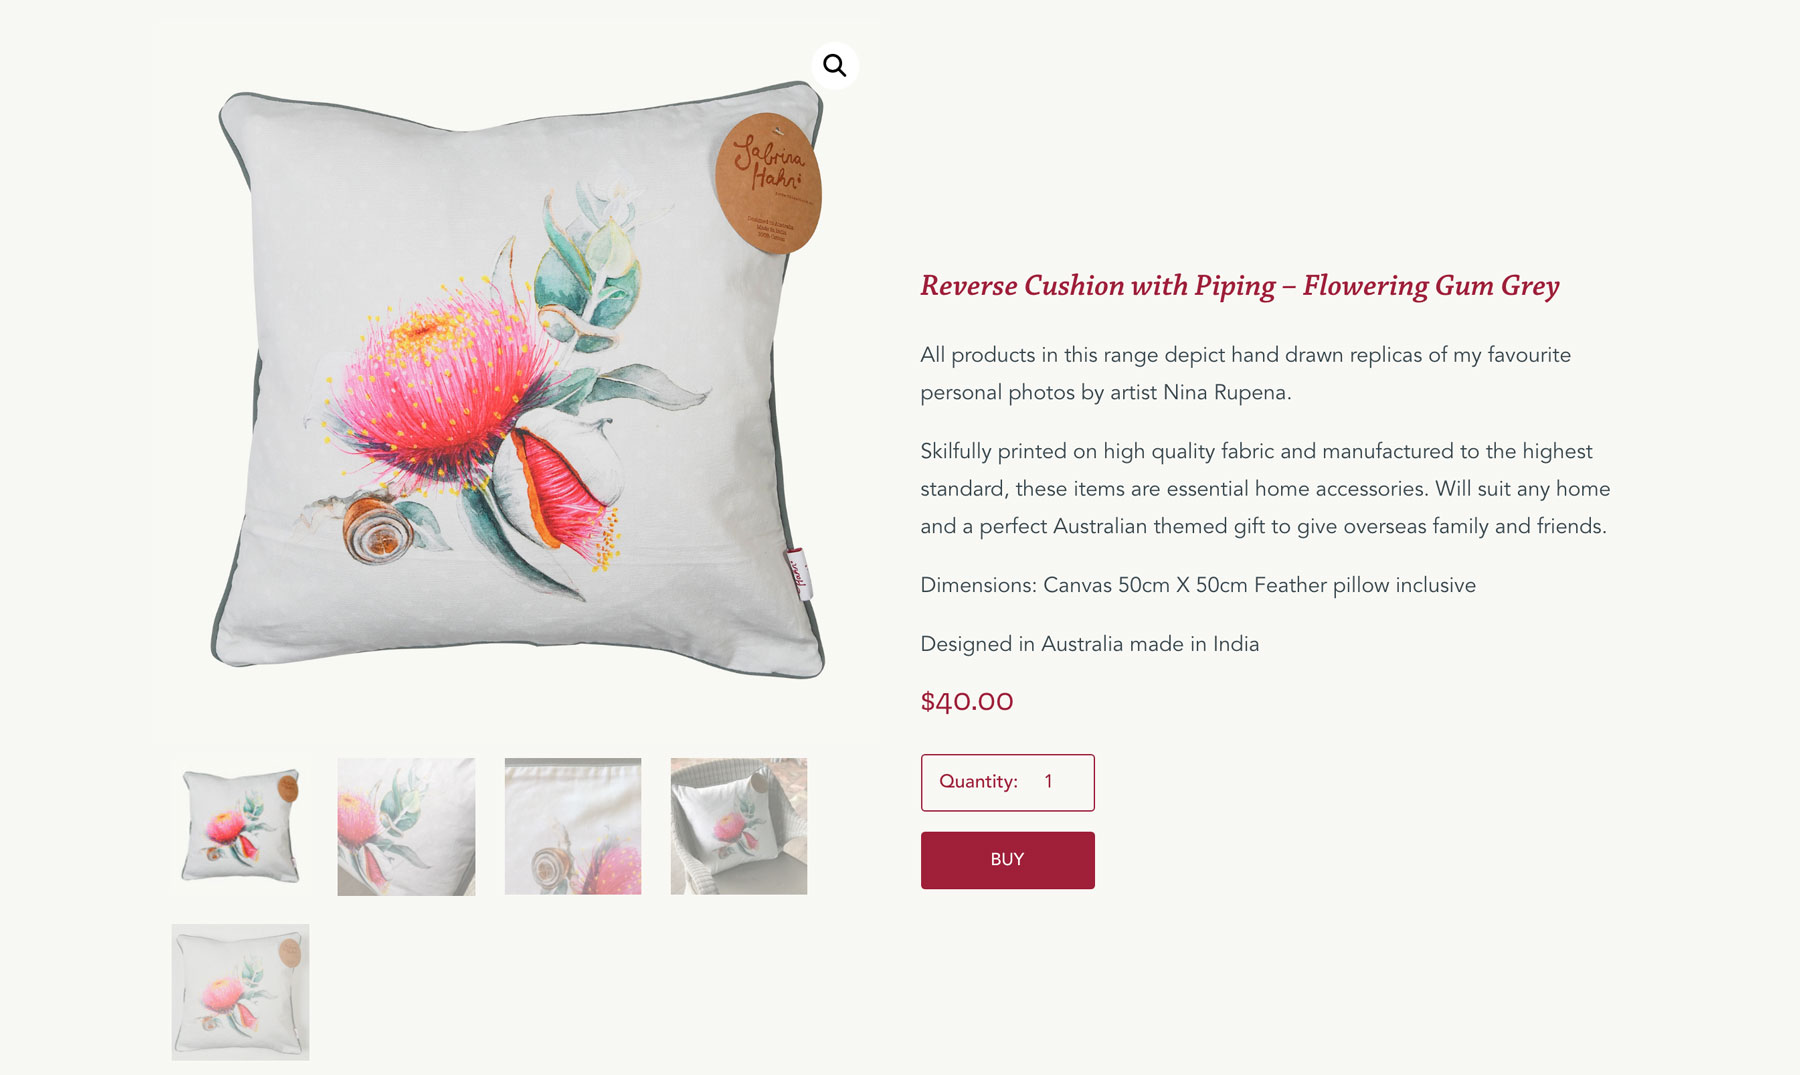 Reverse-Cushion-with-Piping-–-Flowering-Gum-Grey-–-Sabrina-Hahn-–-Hort-with-Heart-WEB